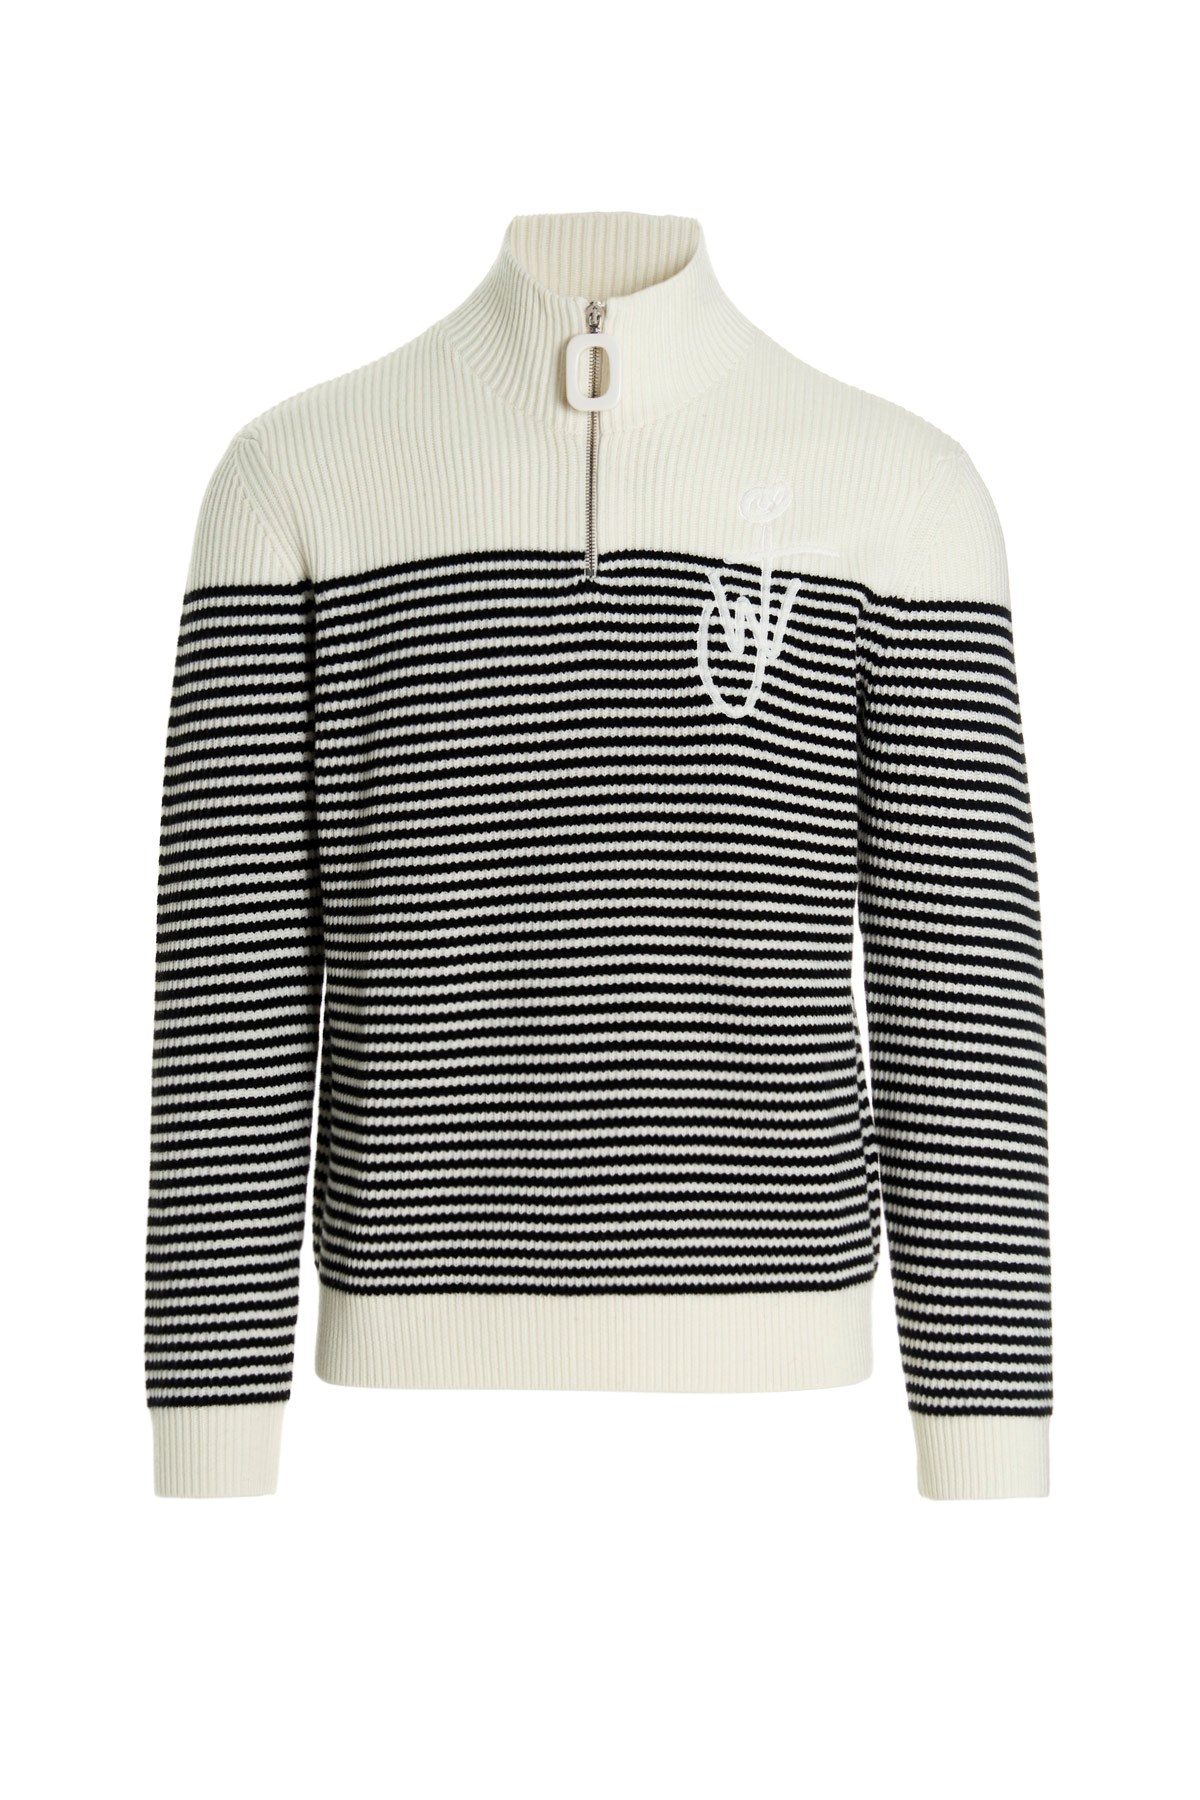 J.W.ANDERSON Logo Embroidery Sweater